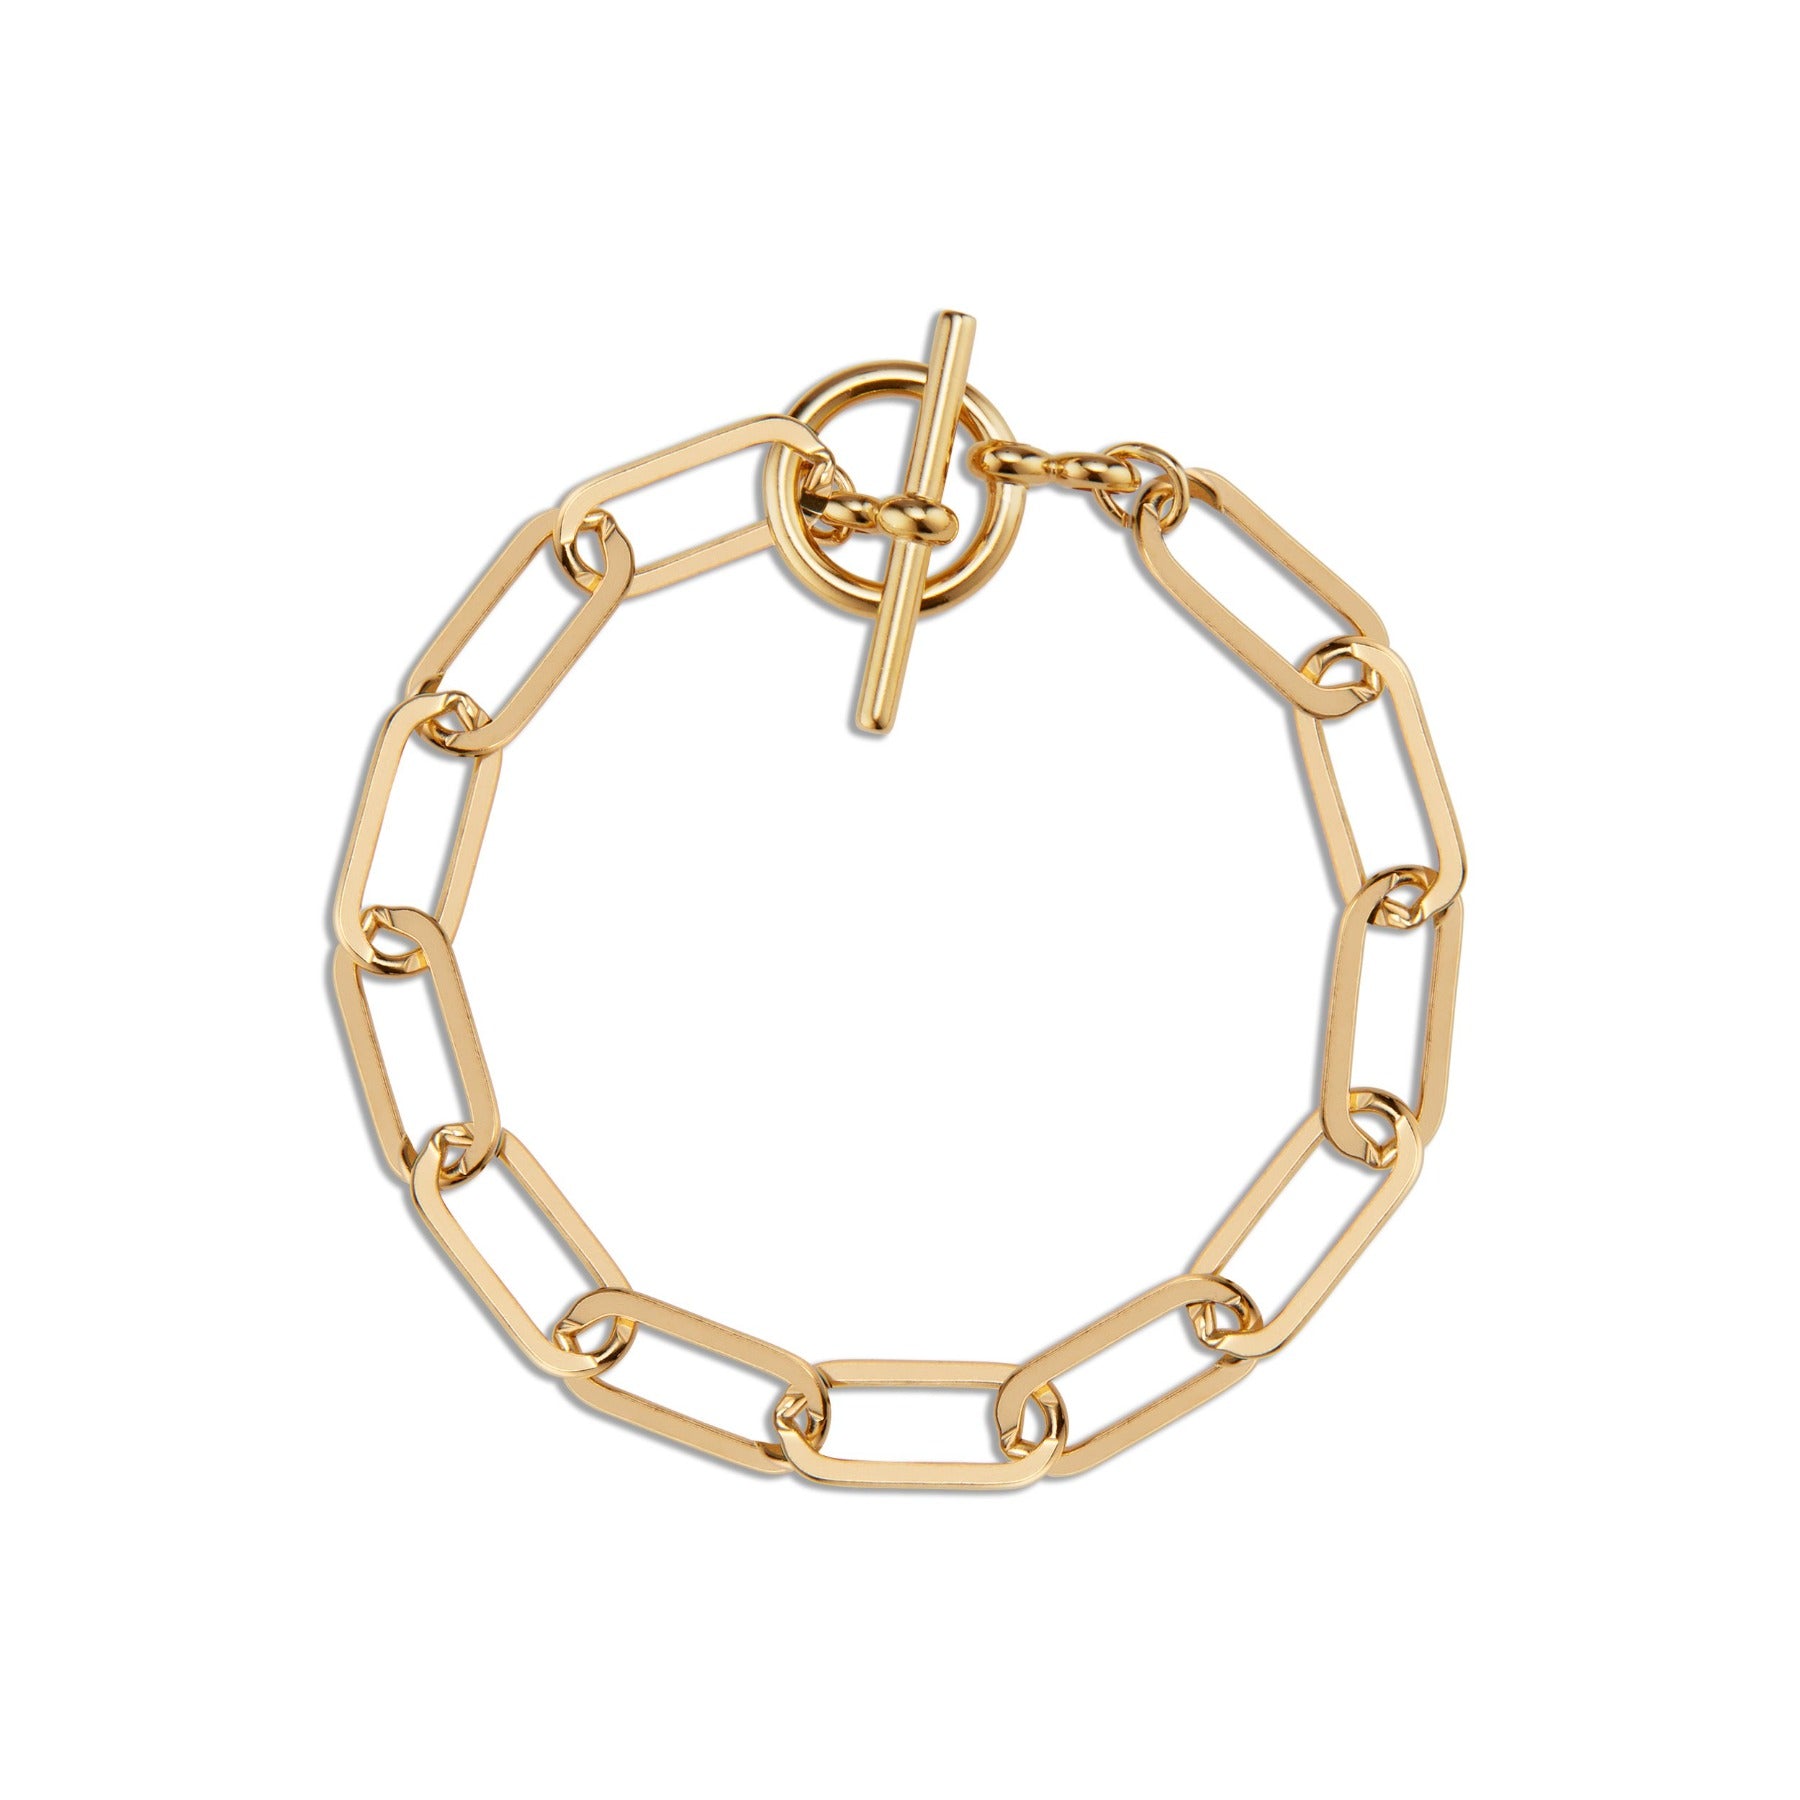 Elongated flat chain link toggle clasp bracelet in 18k gold vermeil.